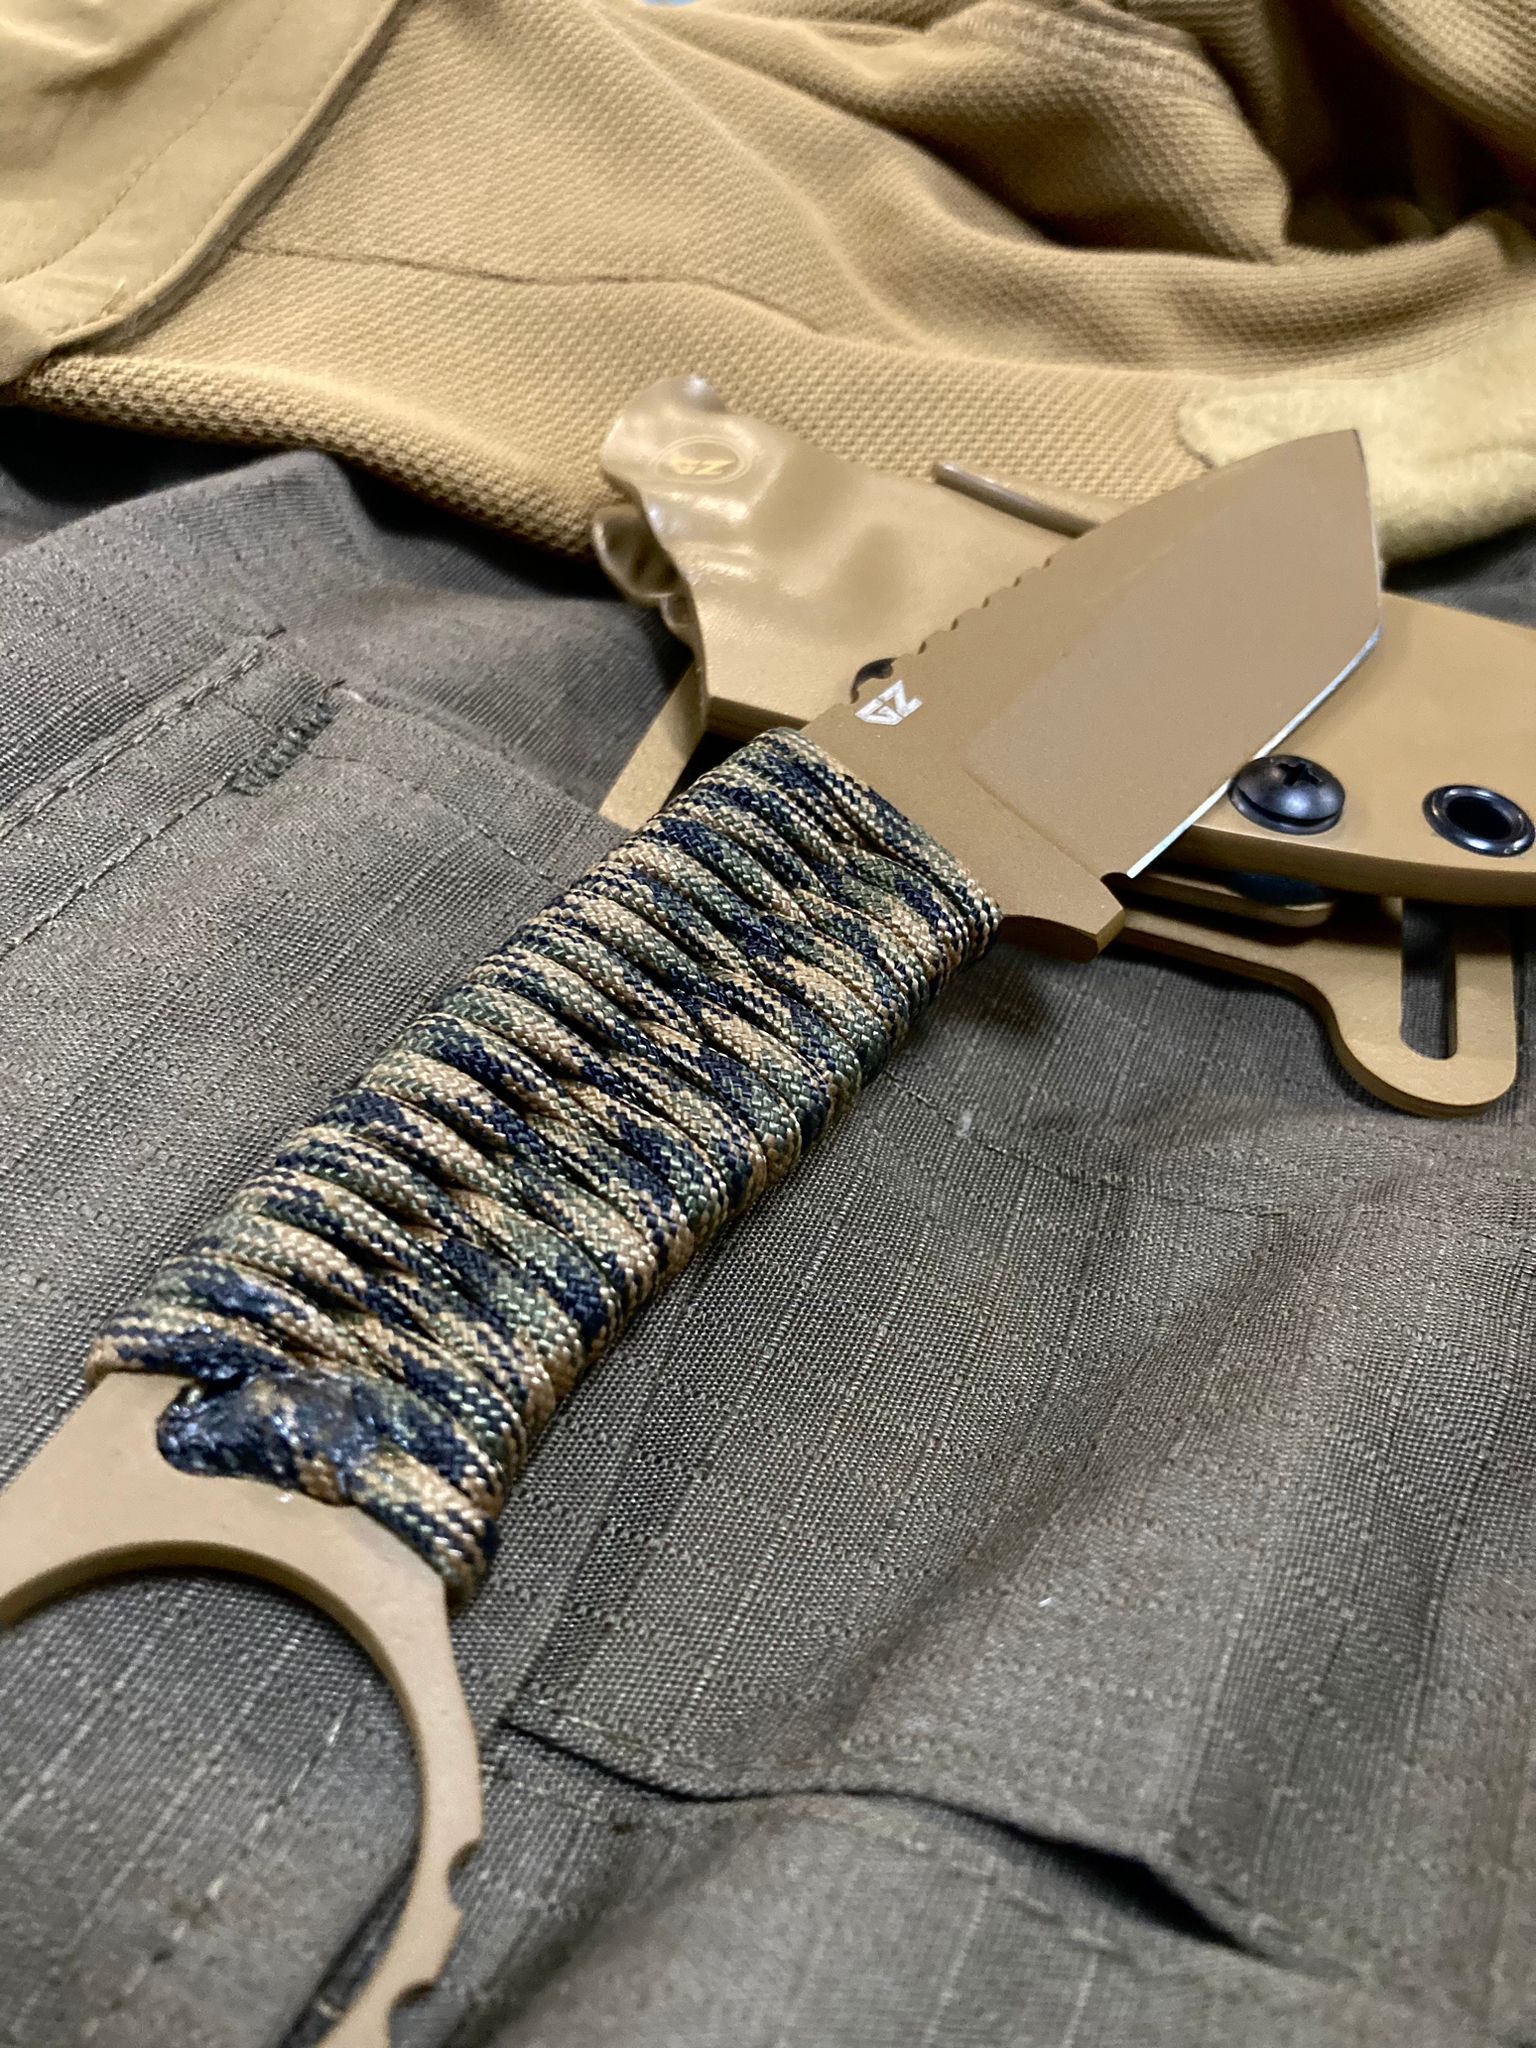 GZ Knives - AMMIT TANTO Paracord